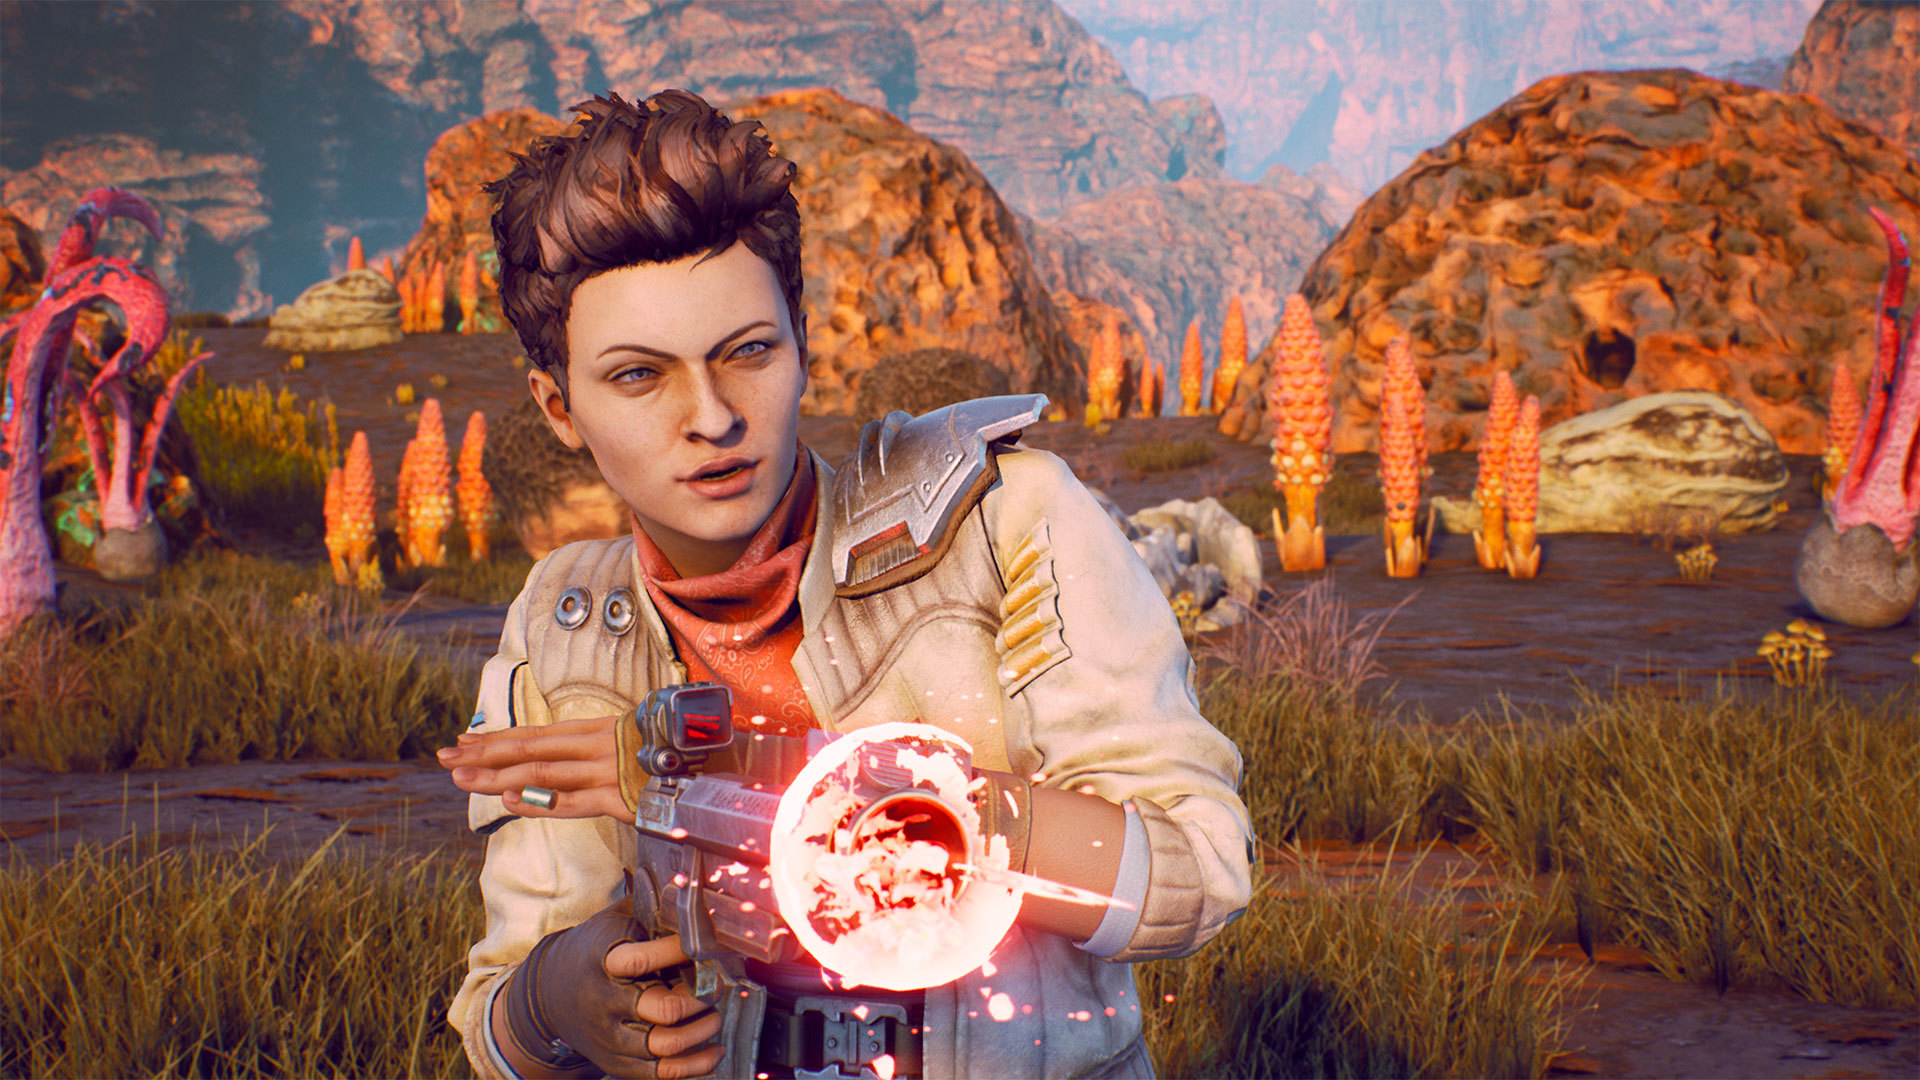 How to Find and Recruit All Companions in The Outer Worlds - The